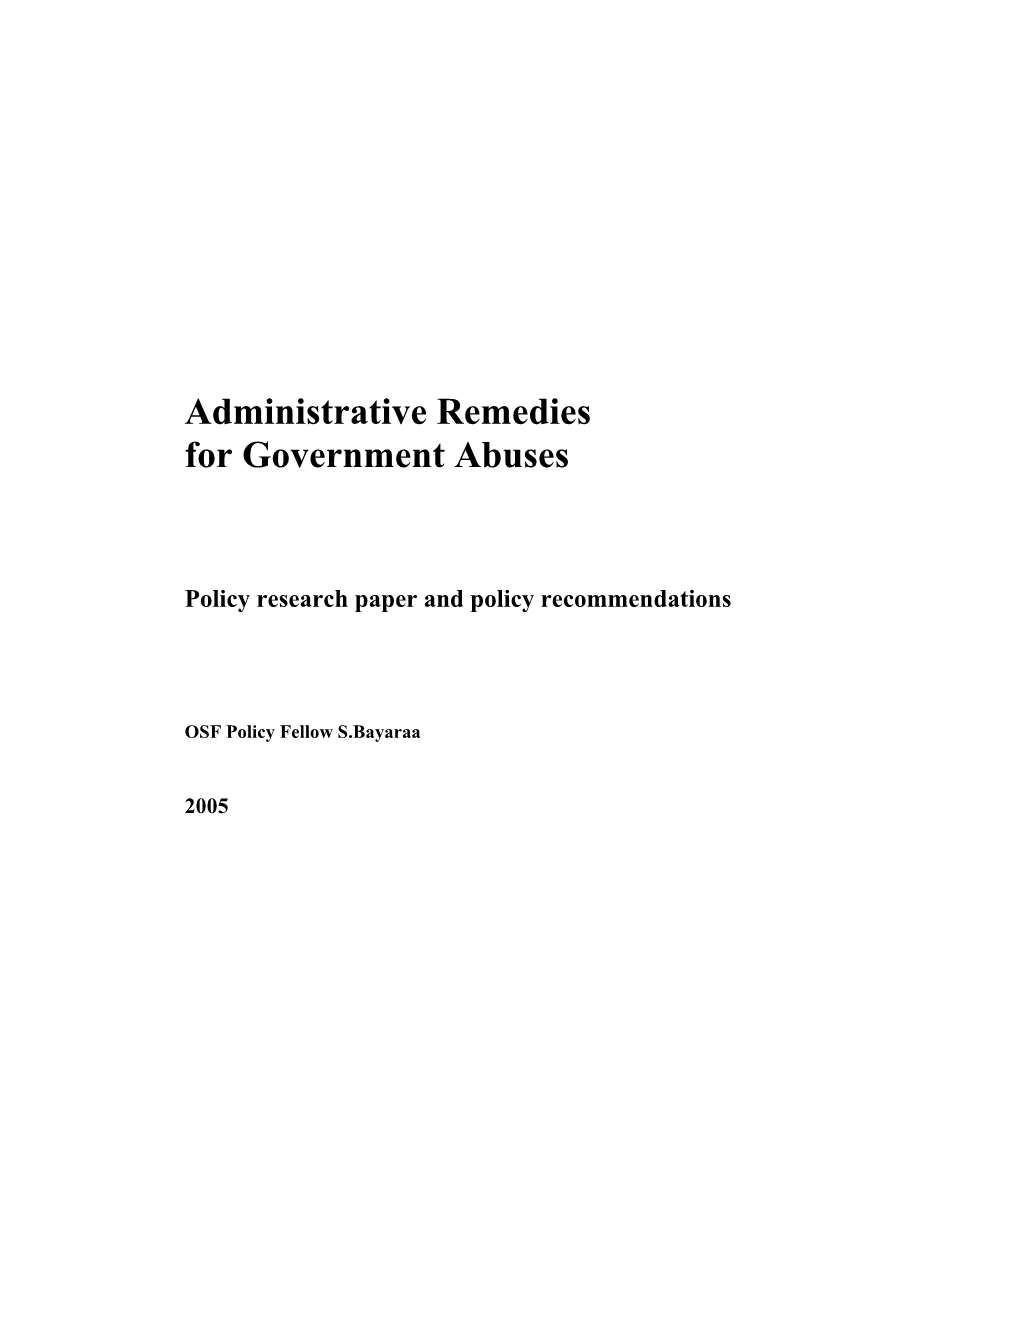 Administrative Remedies for Government Abuses